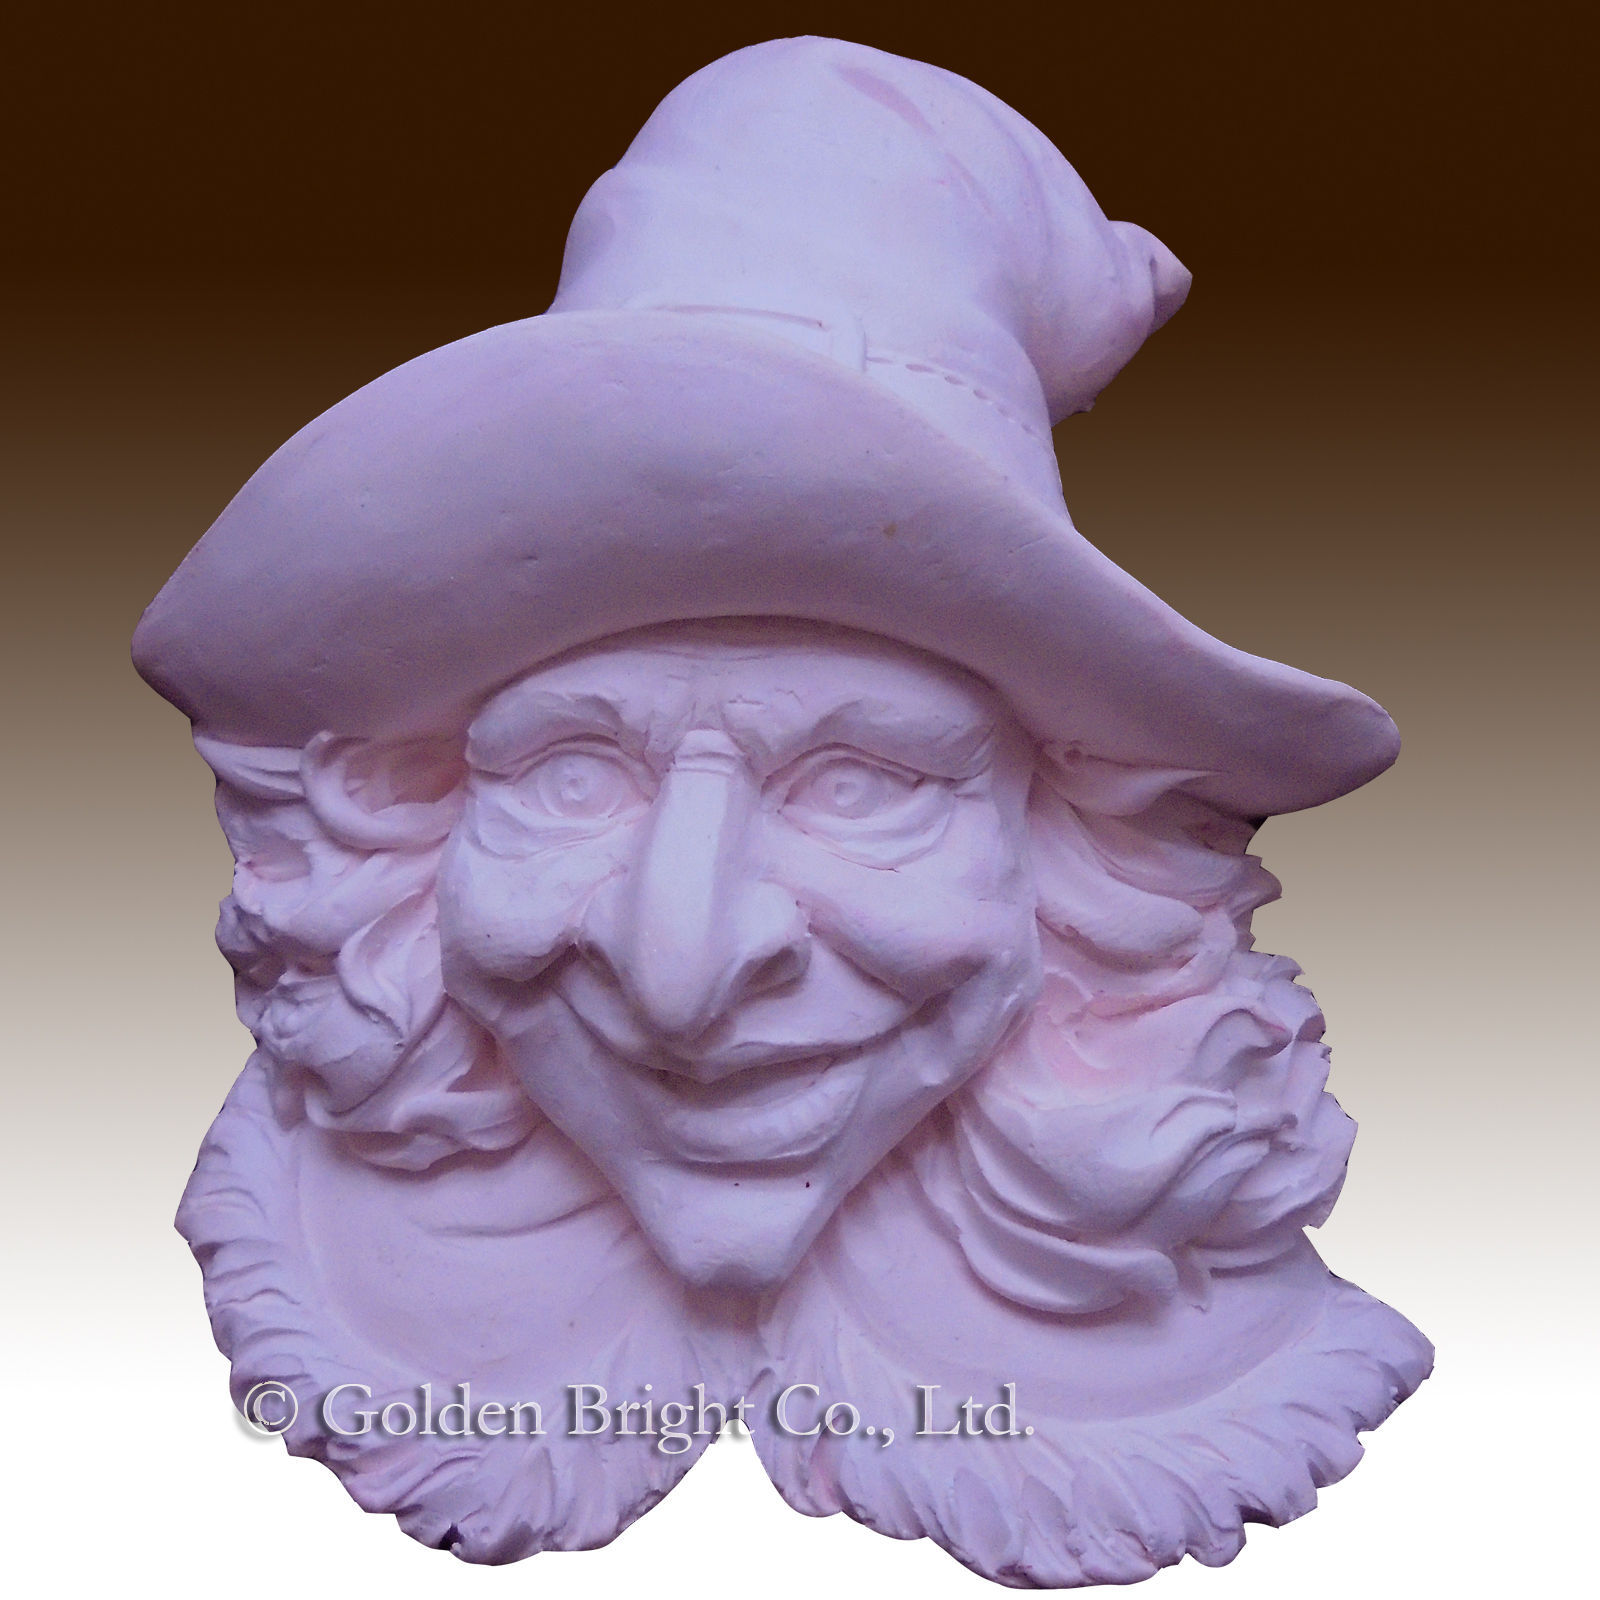 2D Silicone Soap/Clay Mold-Witch Portrait No 2- buy from original designer